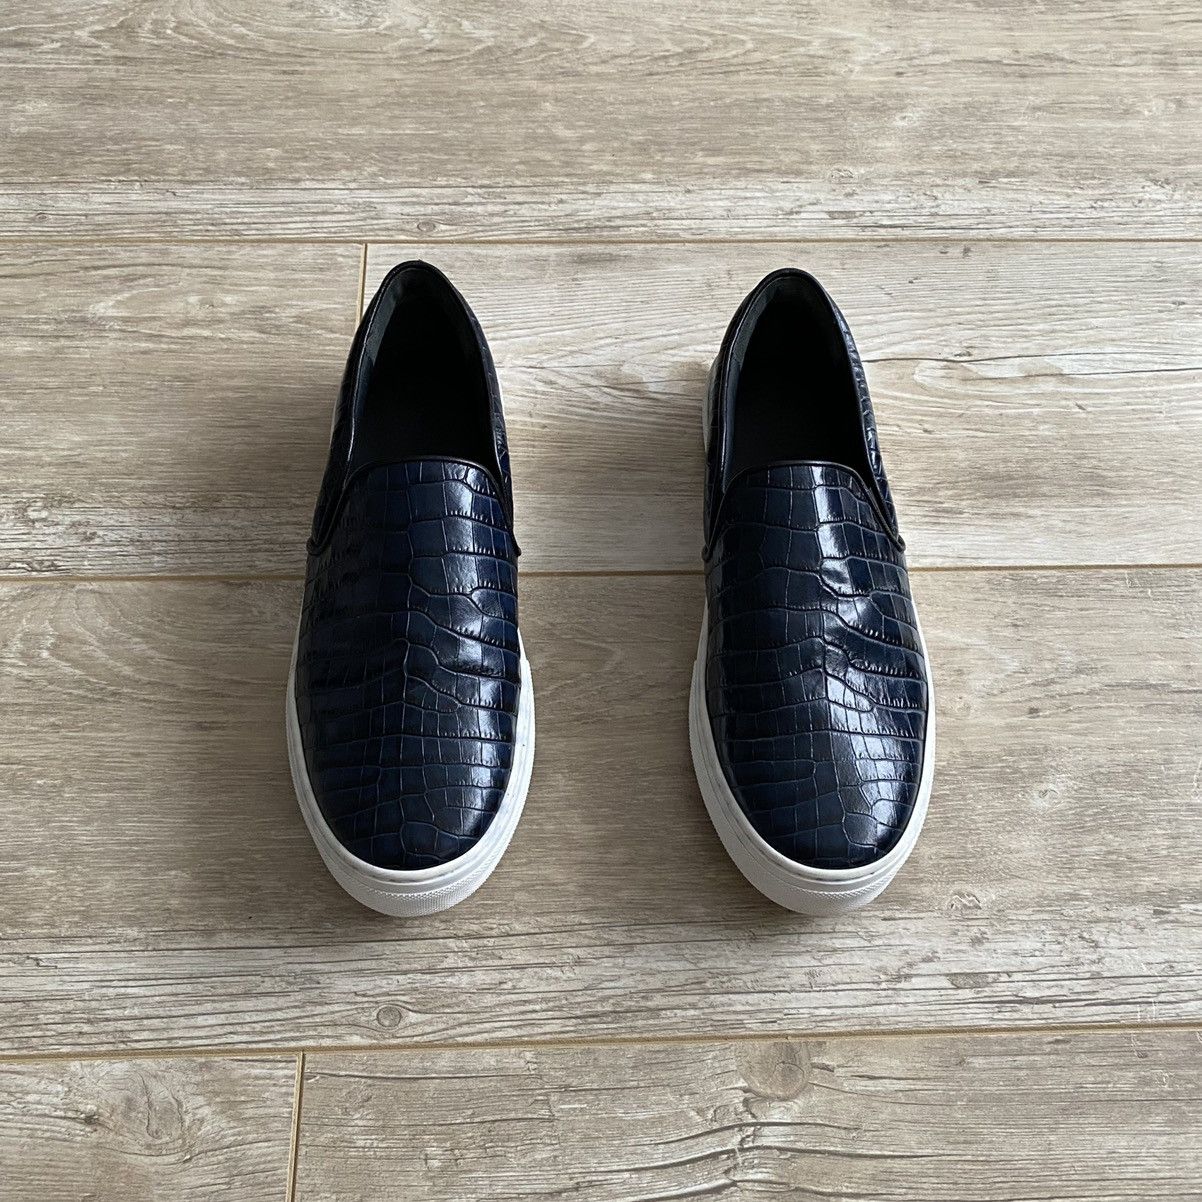 image of Celine Paris Crocodile Embossed Leather Slip-On Shoes in Navy, Women's (Size 9)